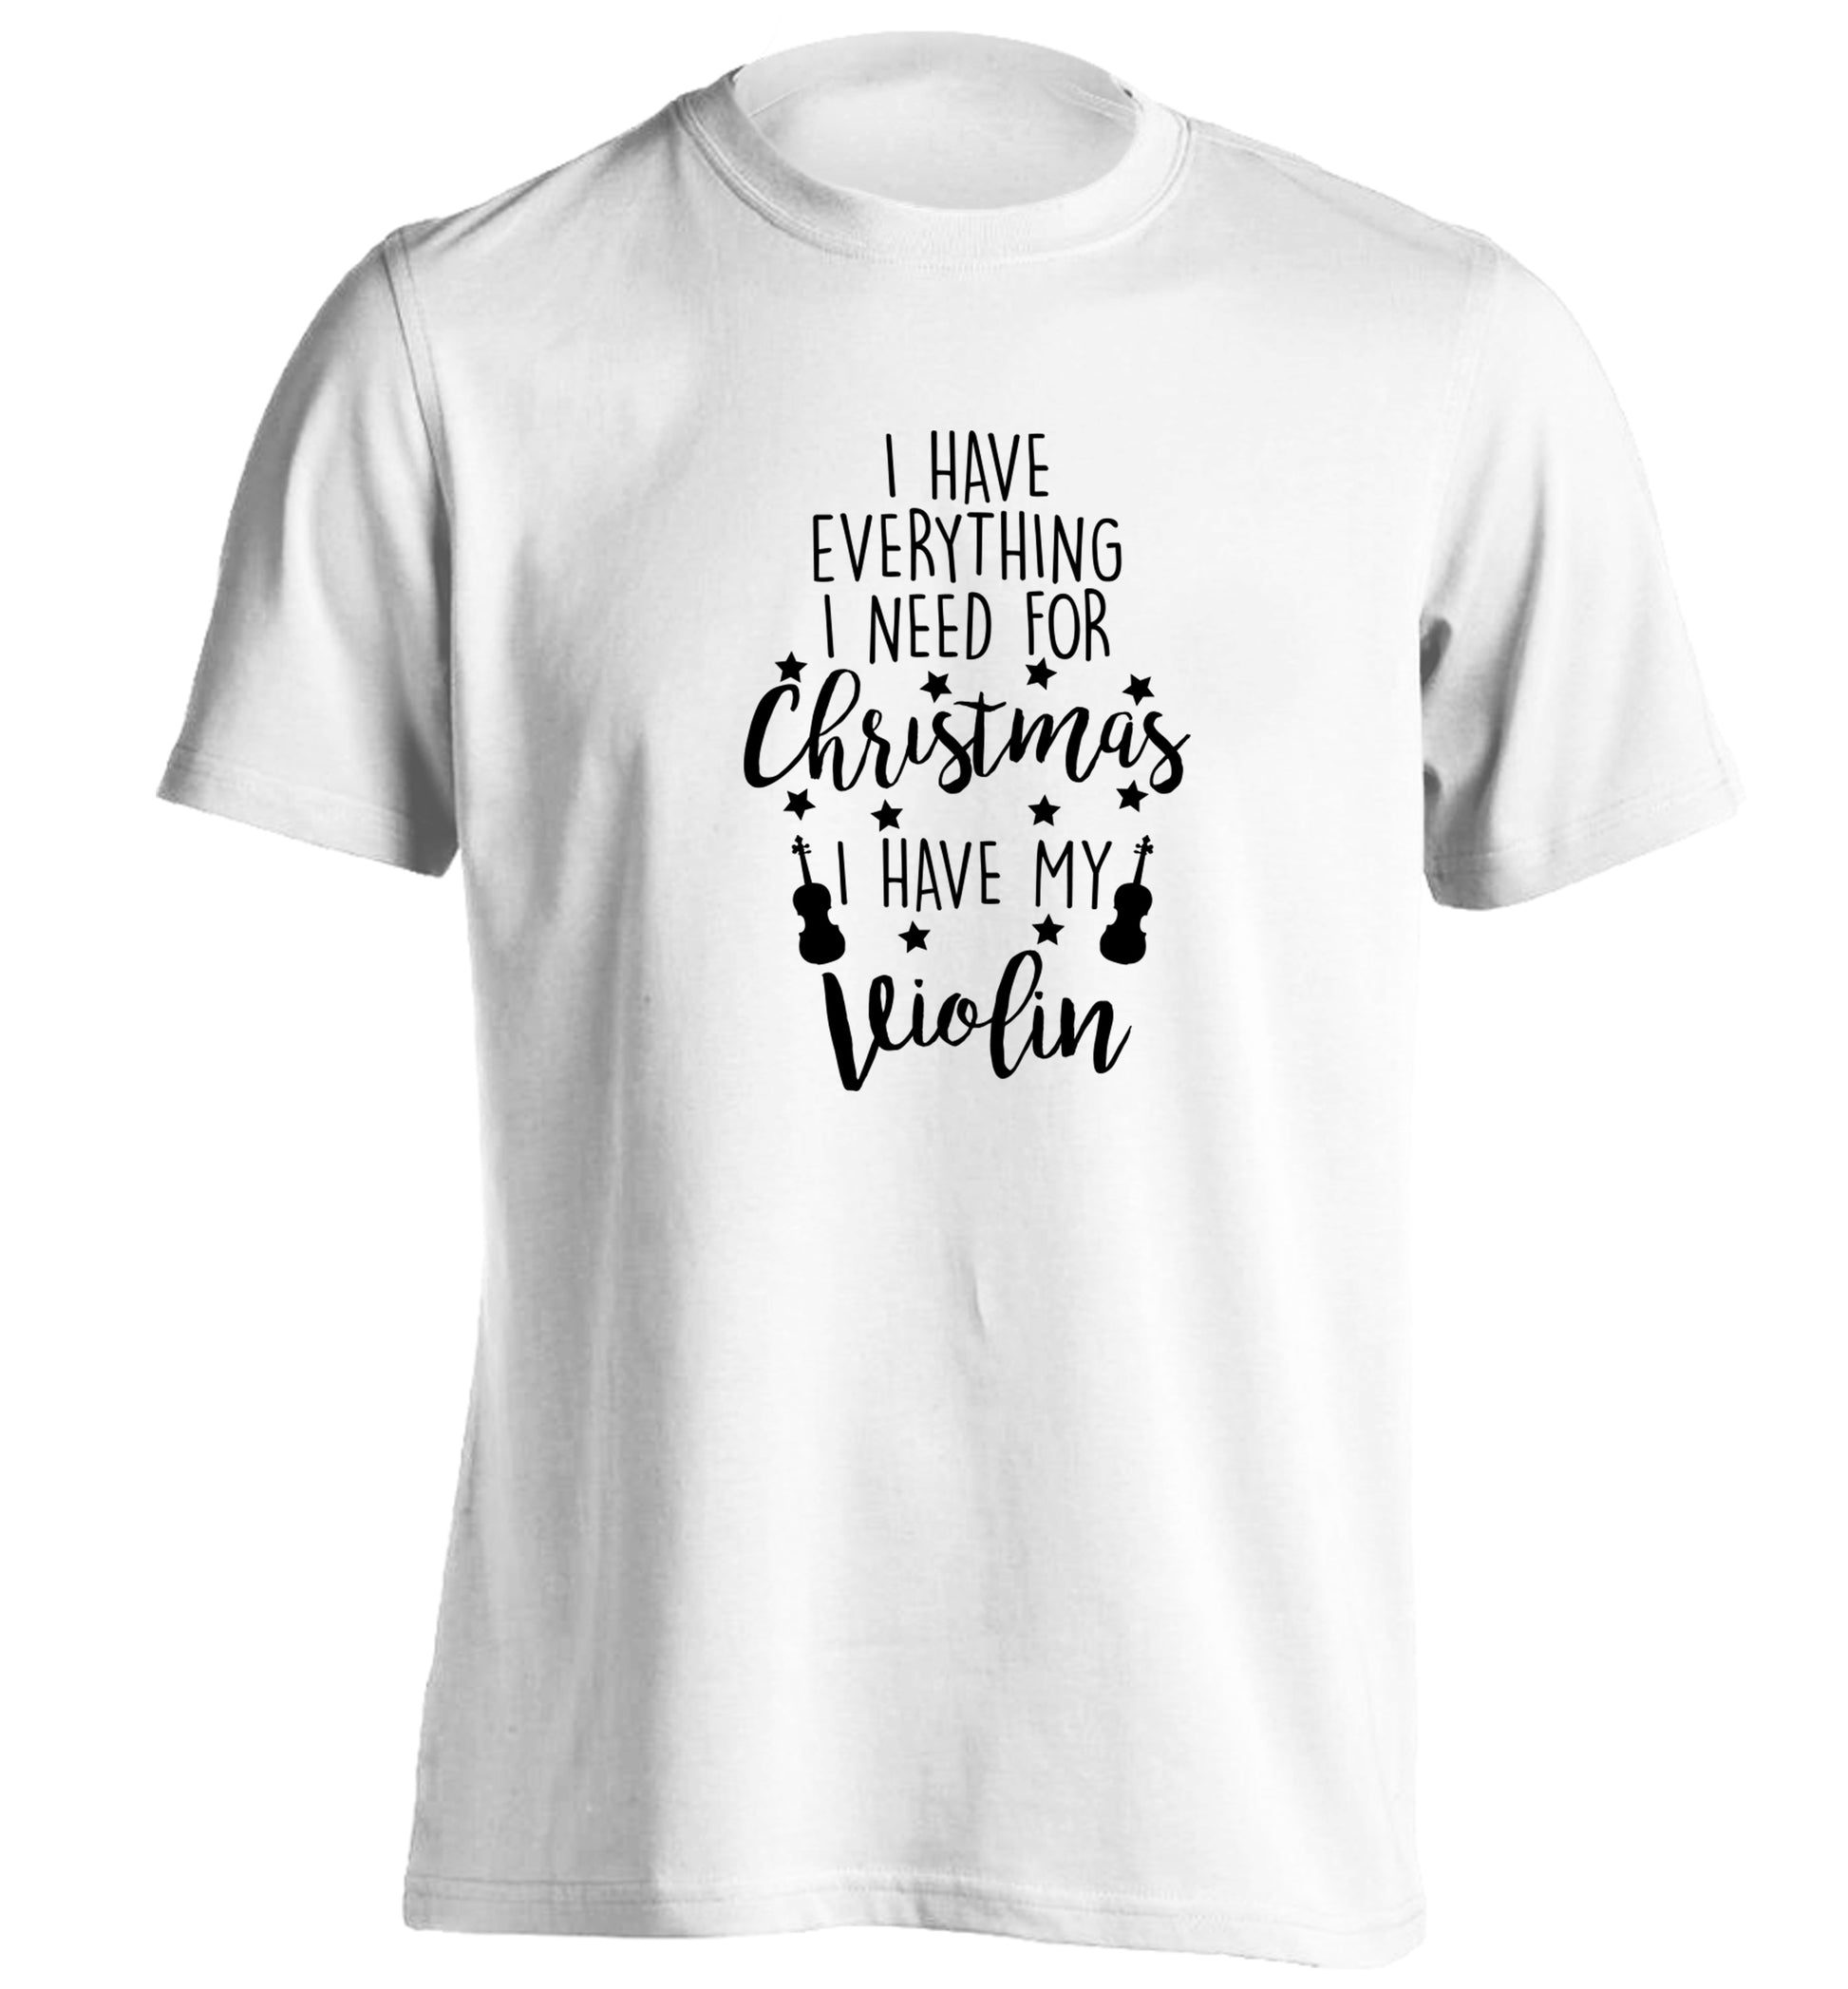 I have everything I need for Christmas I have my violin adults unisex white Tshirt 2XL